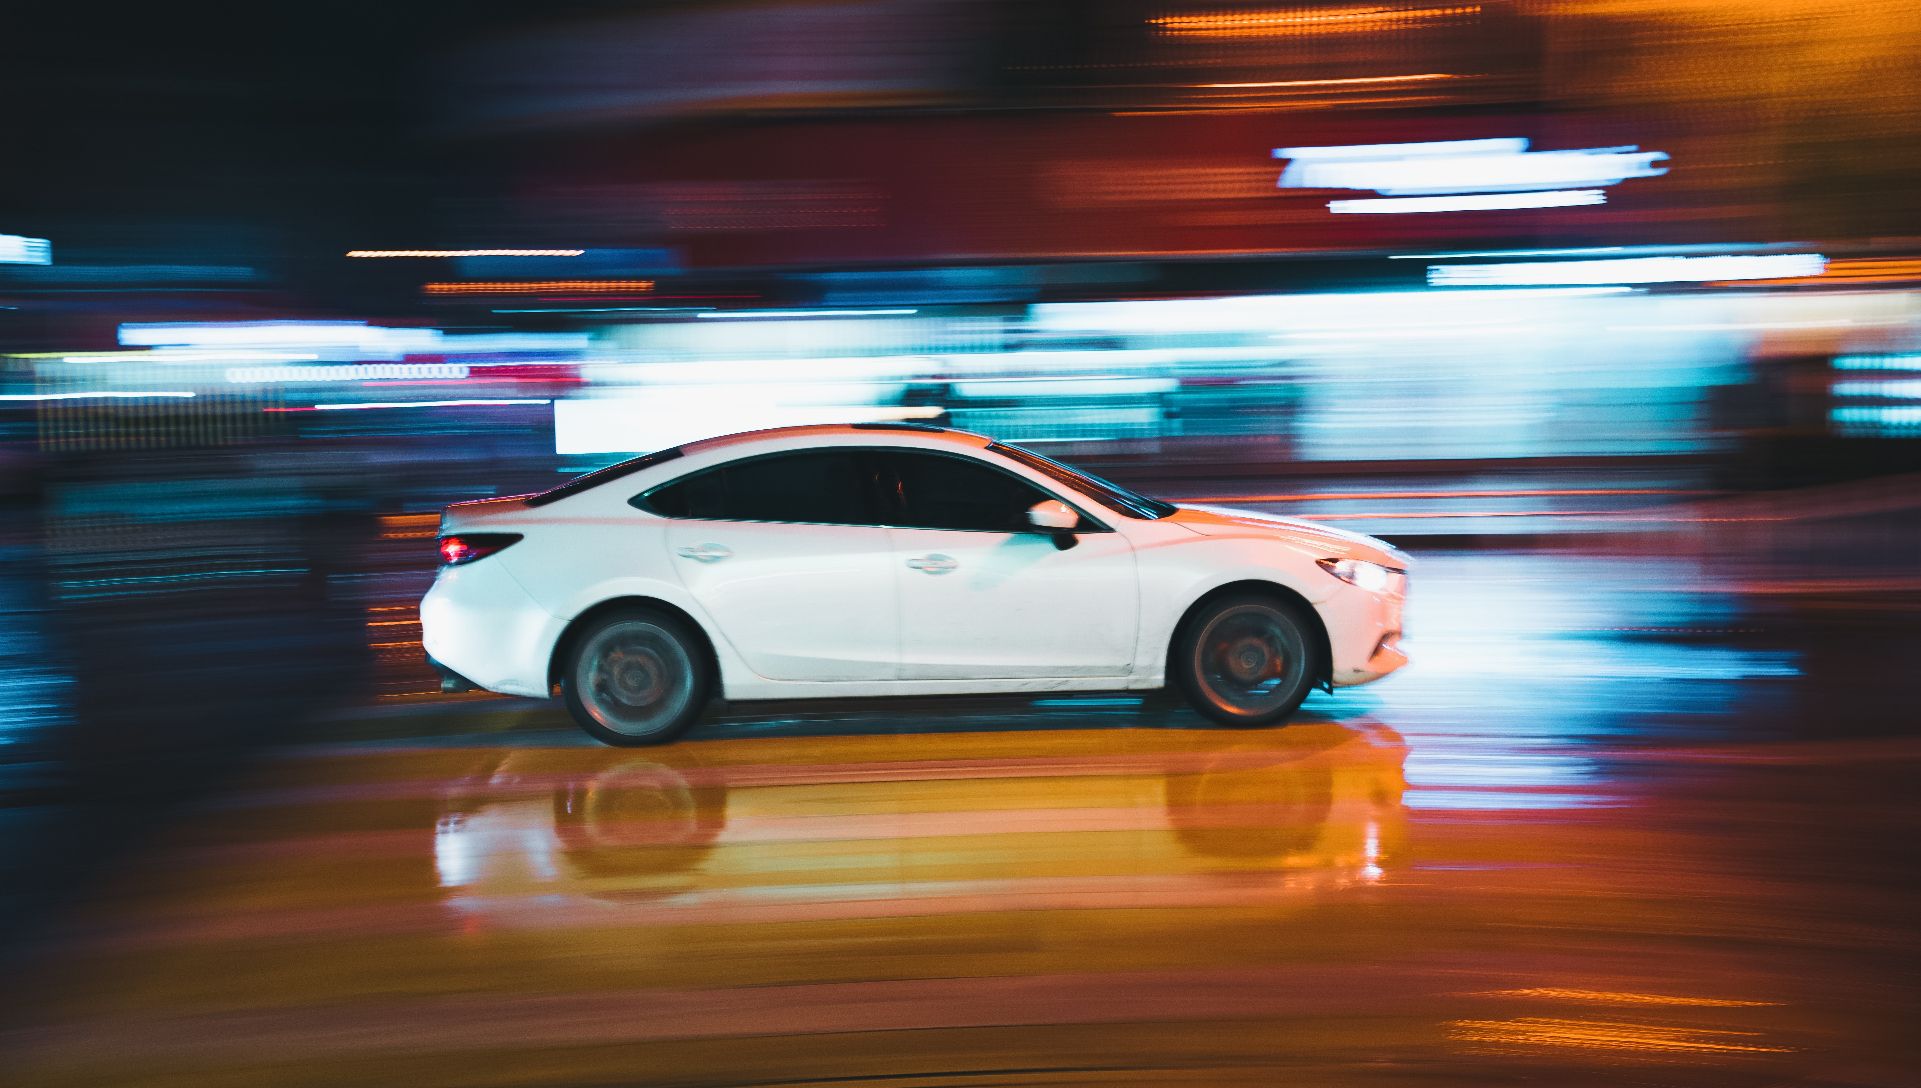 image of car driving at night with blurred background